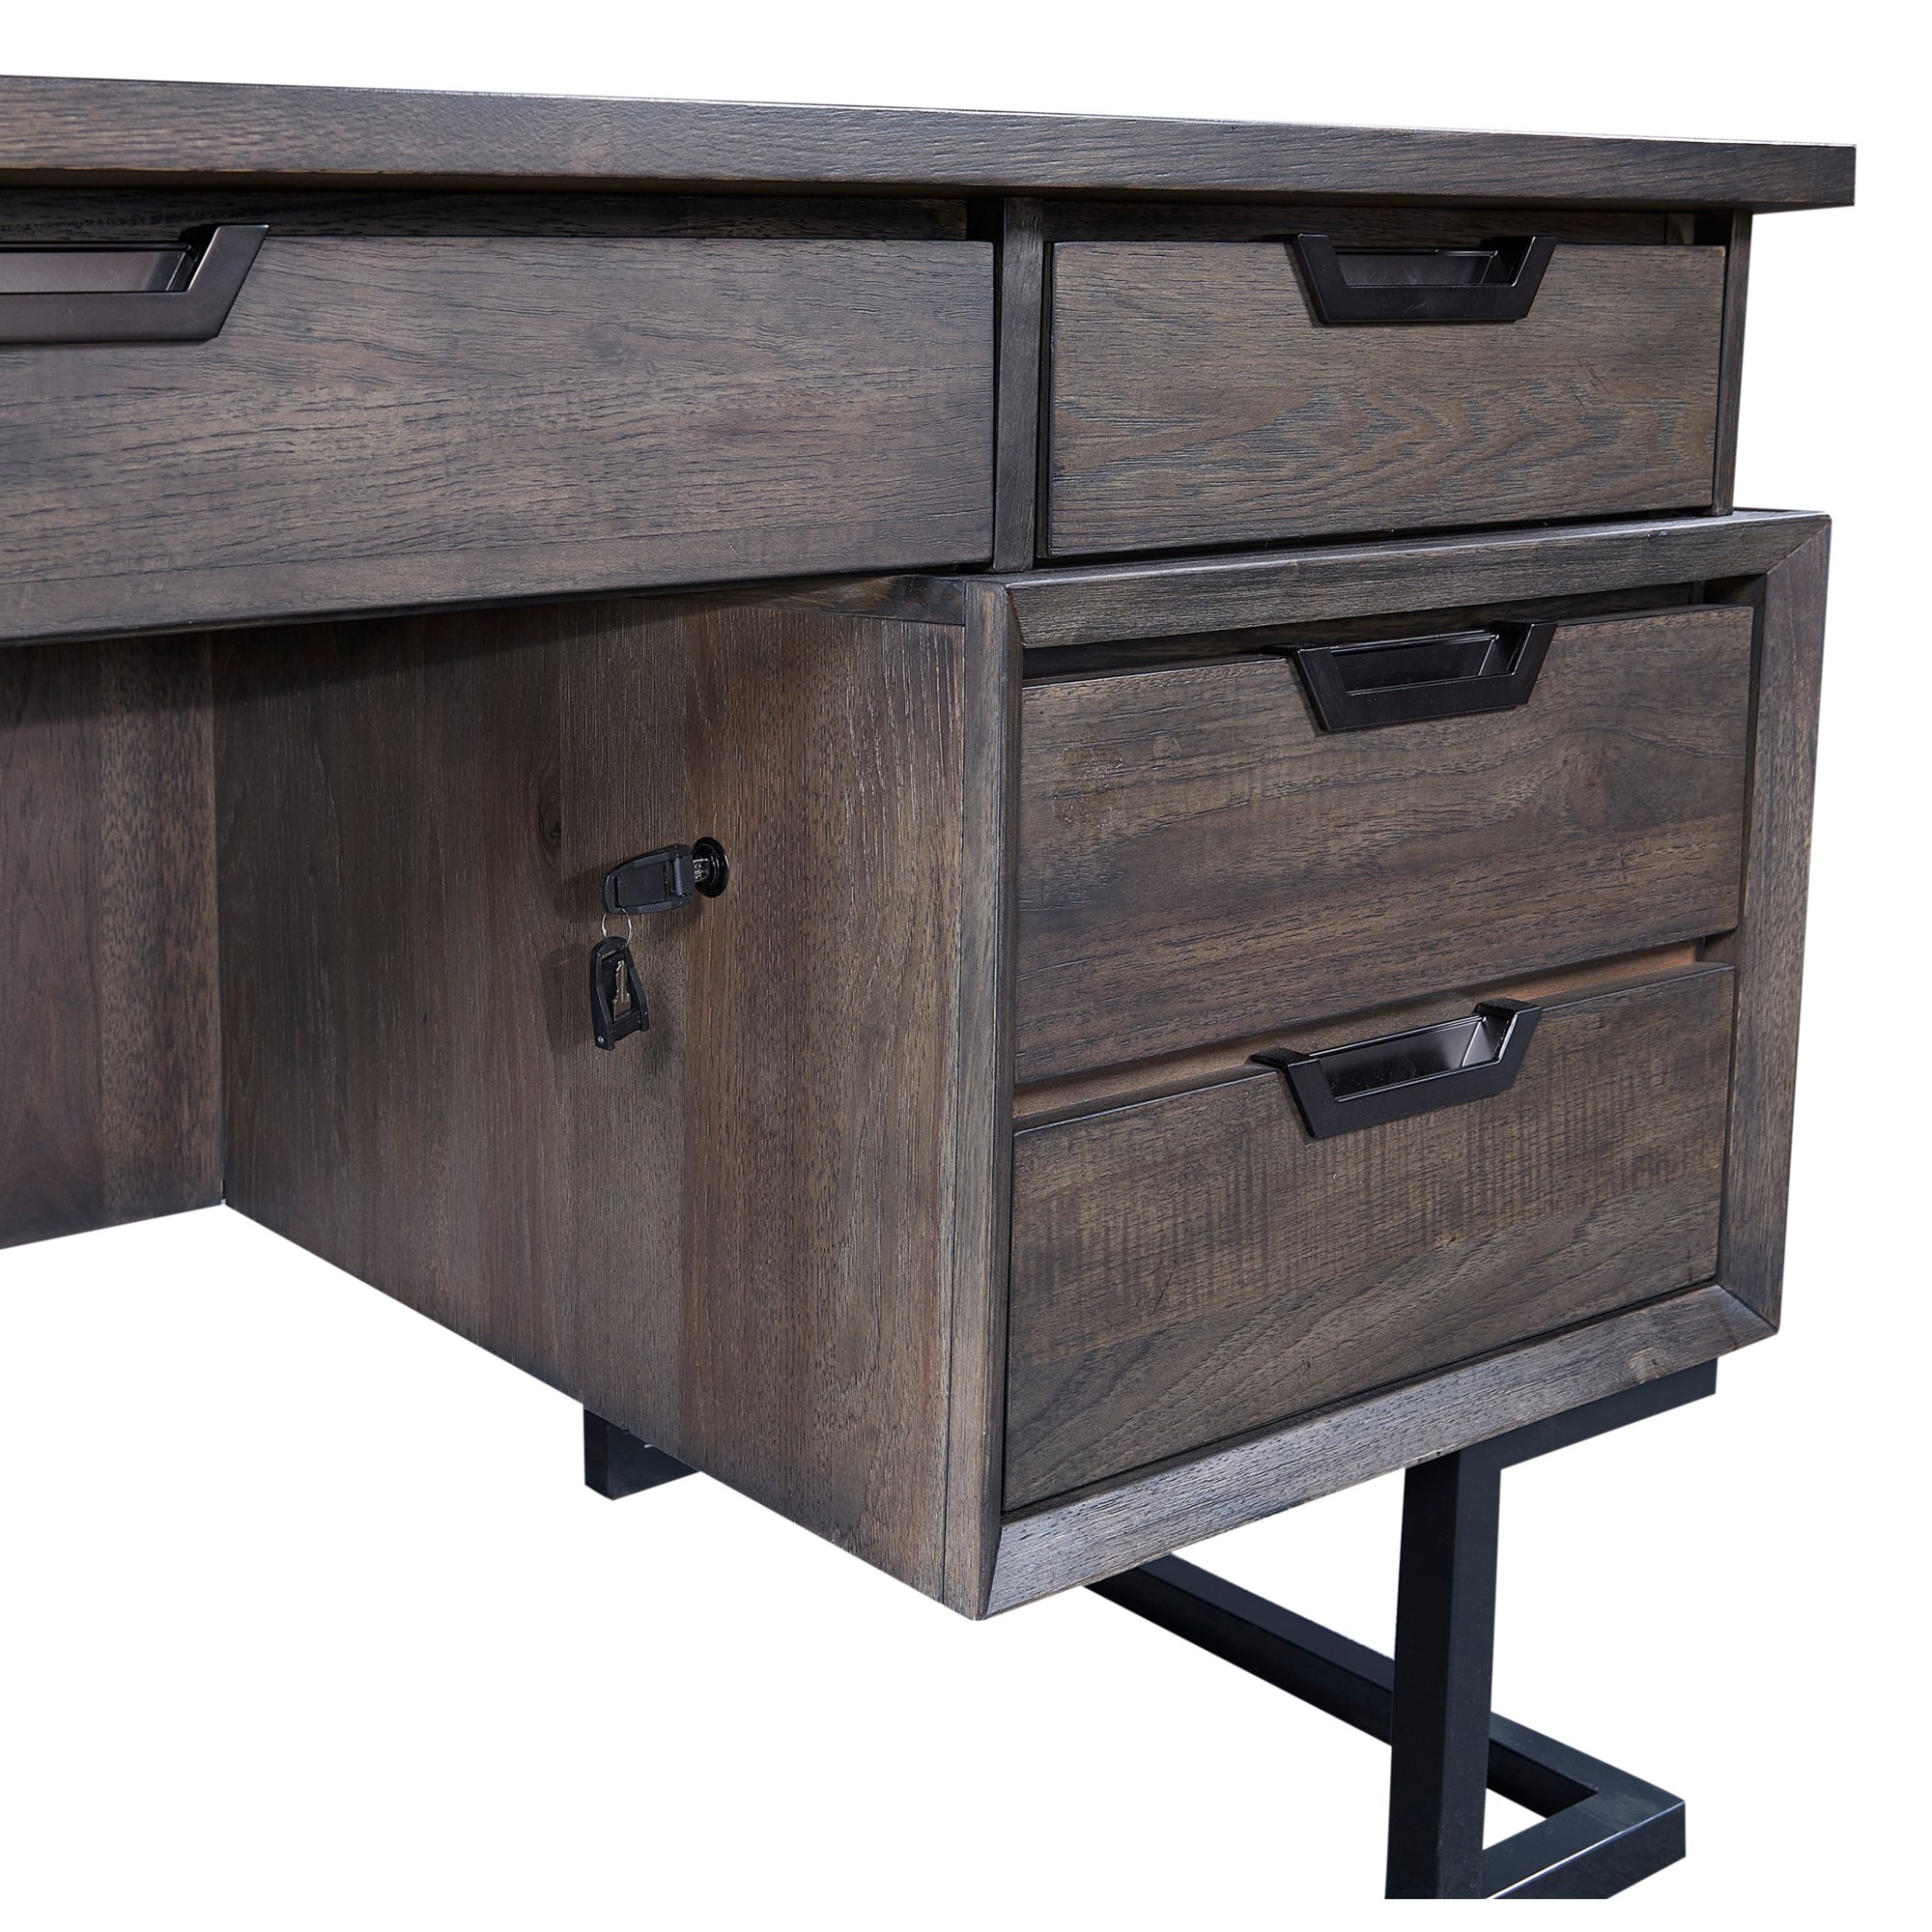 AS049 Steel Office Table with 3 Drawers